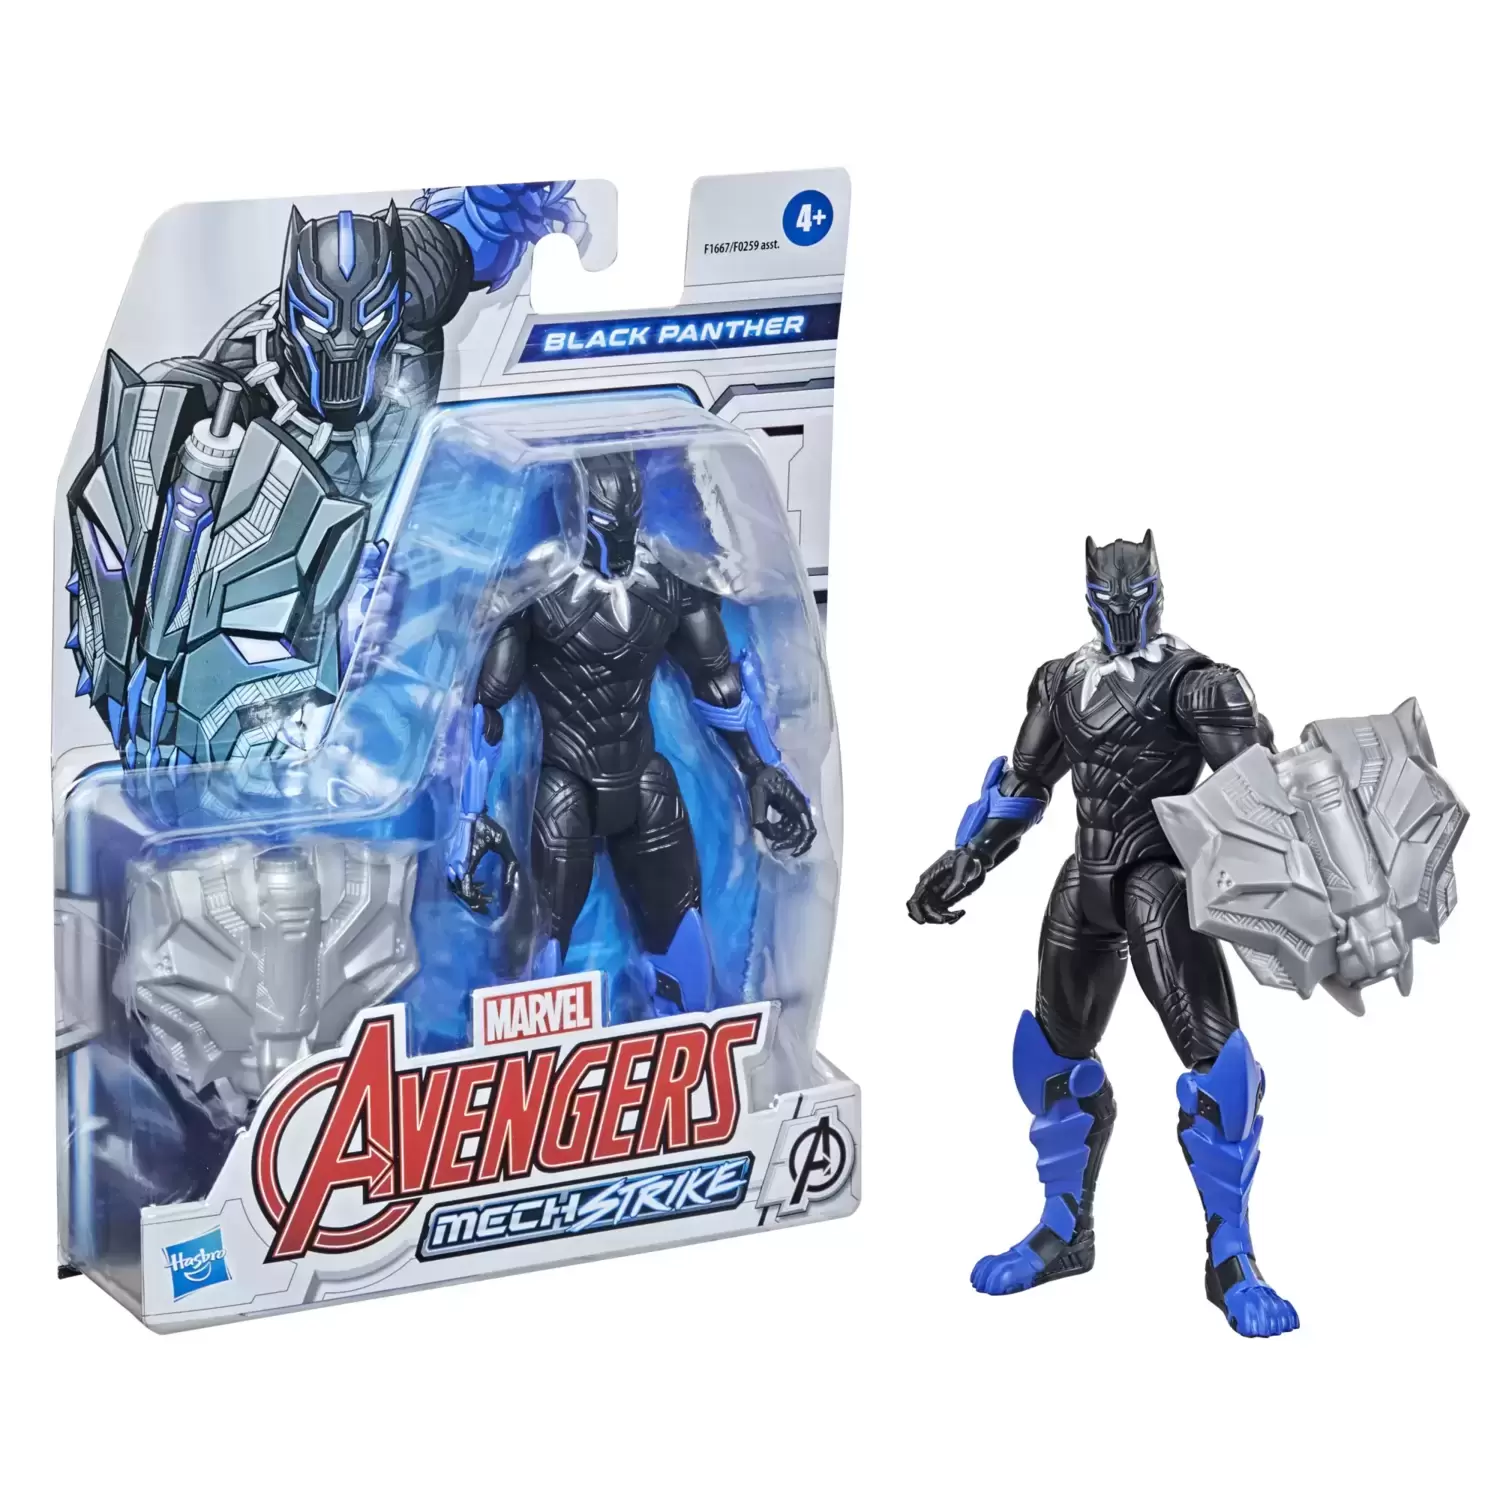 Avengers Mech Strike Action Figures - Black Panther And Battle Accessory